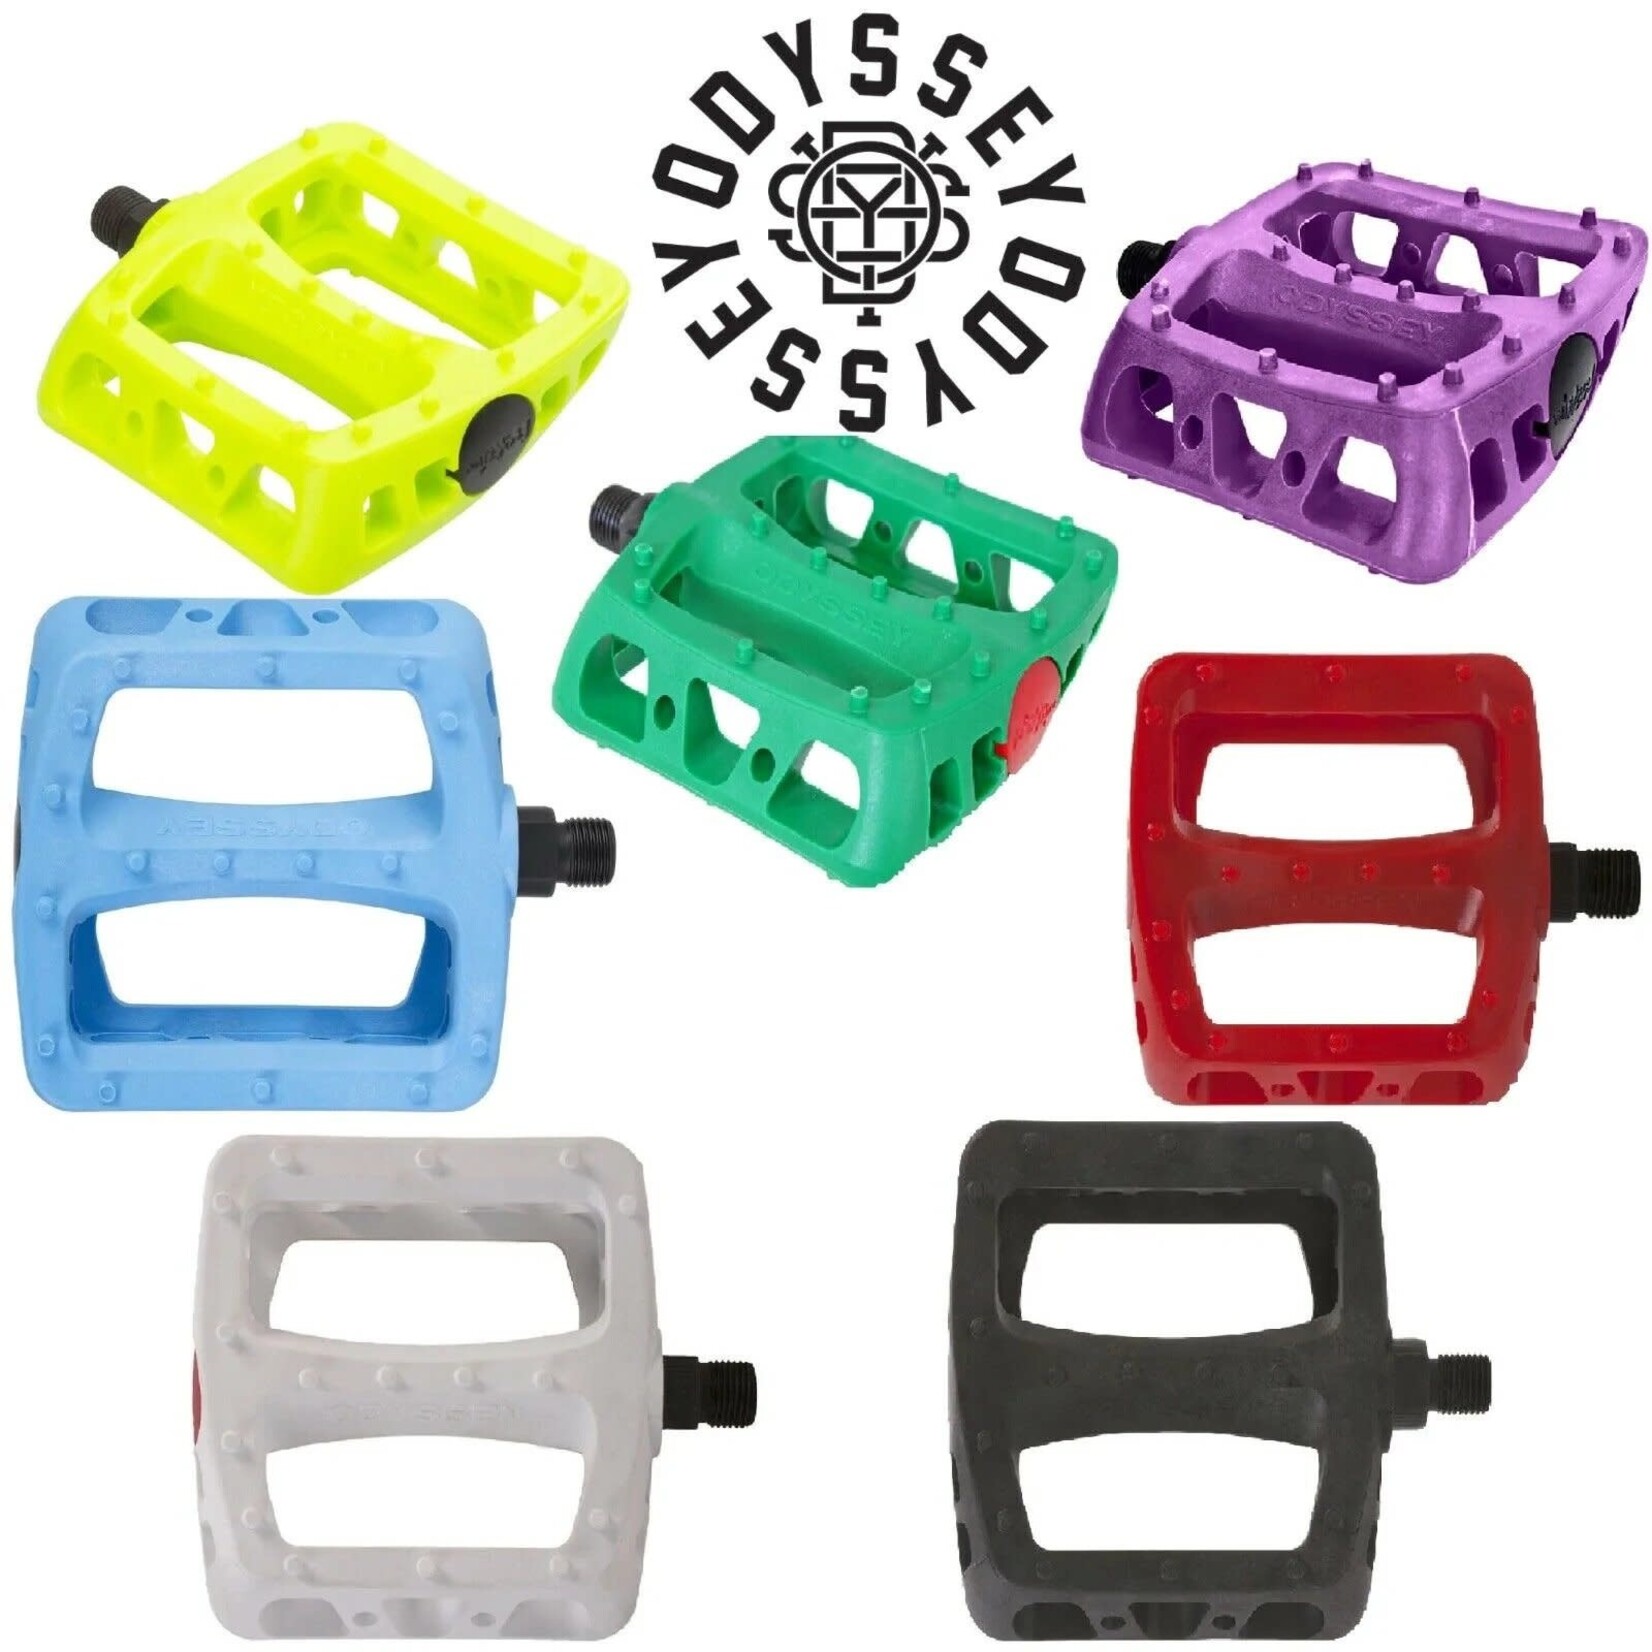 PEDALS ODYSSEY TWISTED PC